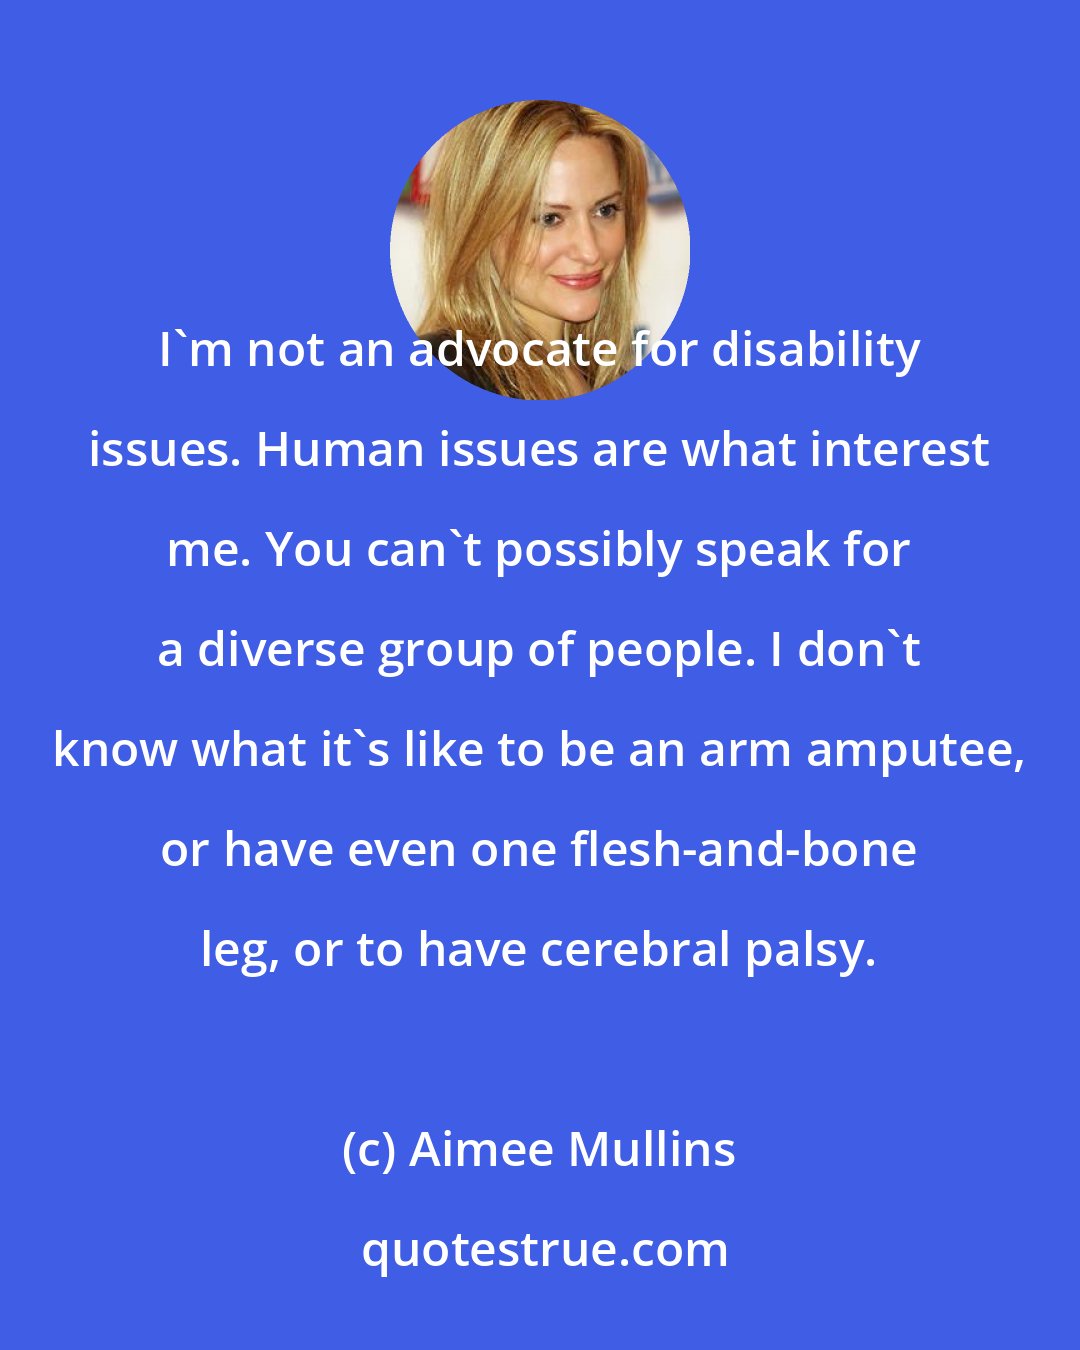 Aimee Mullins: I'm not an advocate for disability issues. Human issues are what interest me. You can't possibly speak for a diverse group of people. I don't know what it's like to be an arm amputee, or have even one flesh-and-bone leg, or to have cerebral palsy.